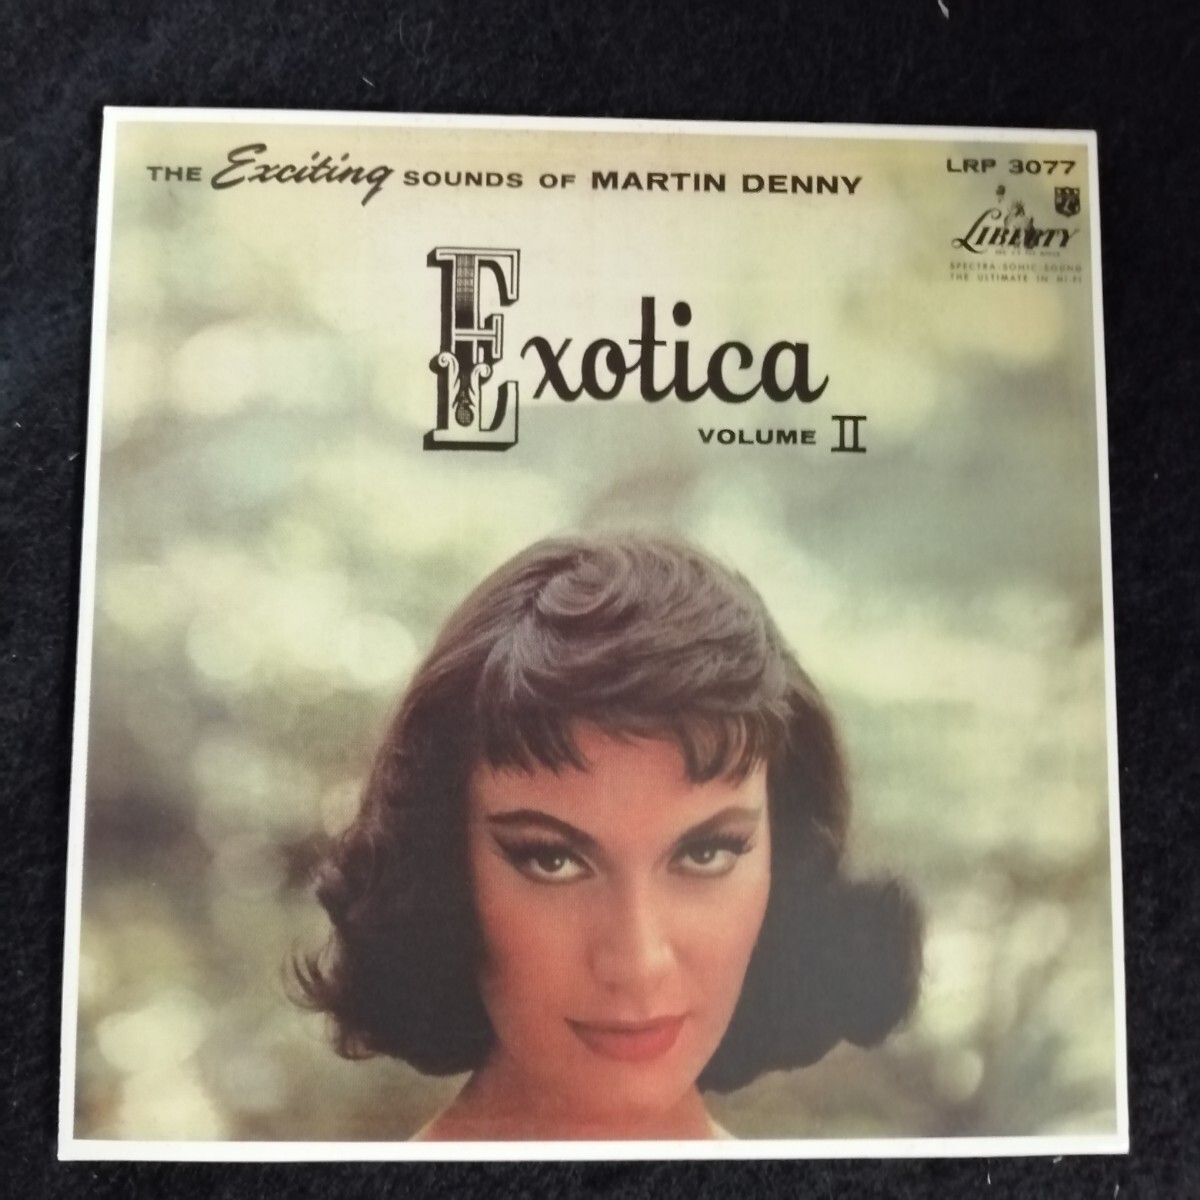 D04 中古CD　マーティンデニー　エキゾチカ vol.2,vol.3 MSIG0173 MSIG0186 the exotic sounds of MARTIN DENNY exotica_画像3